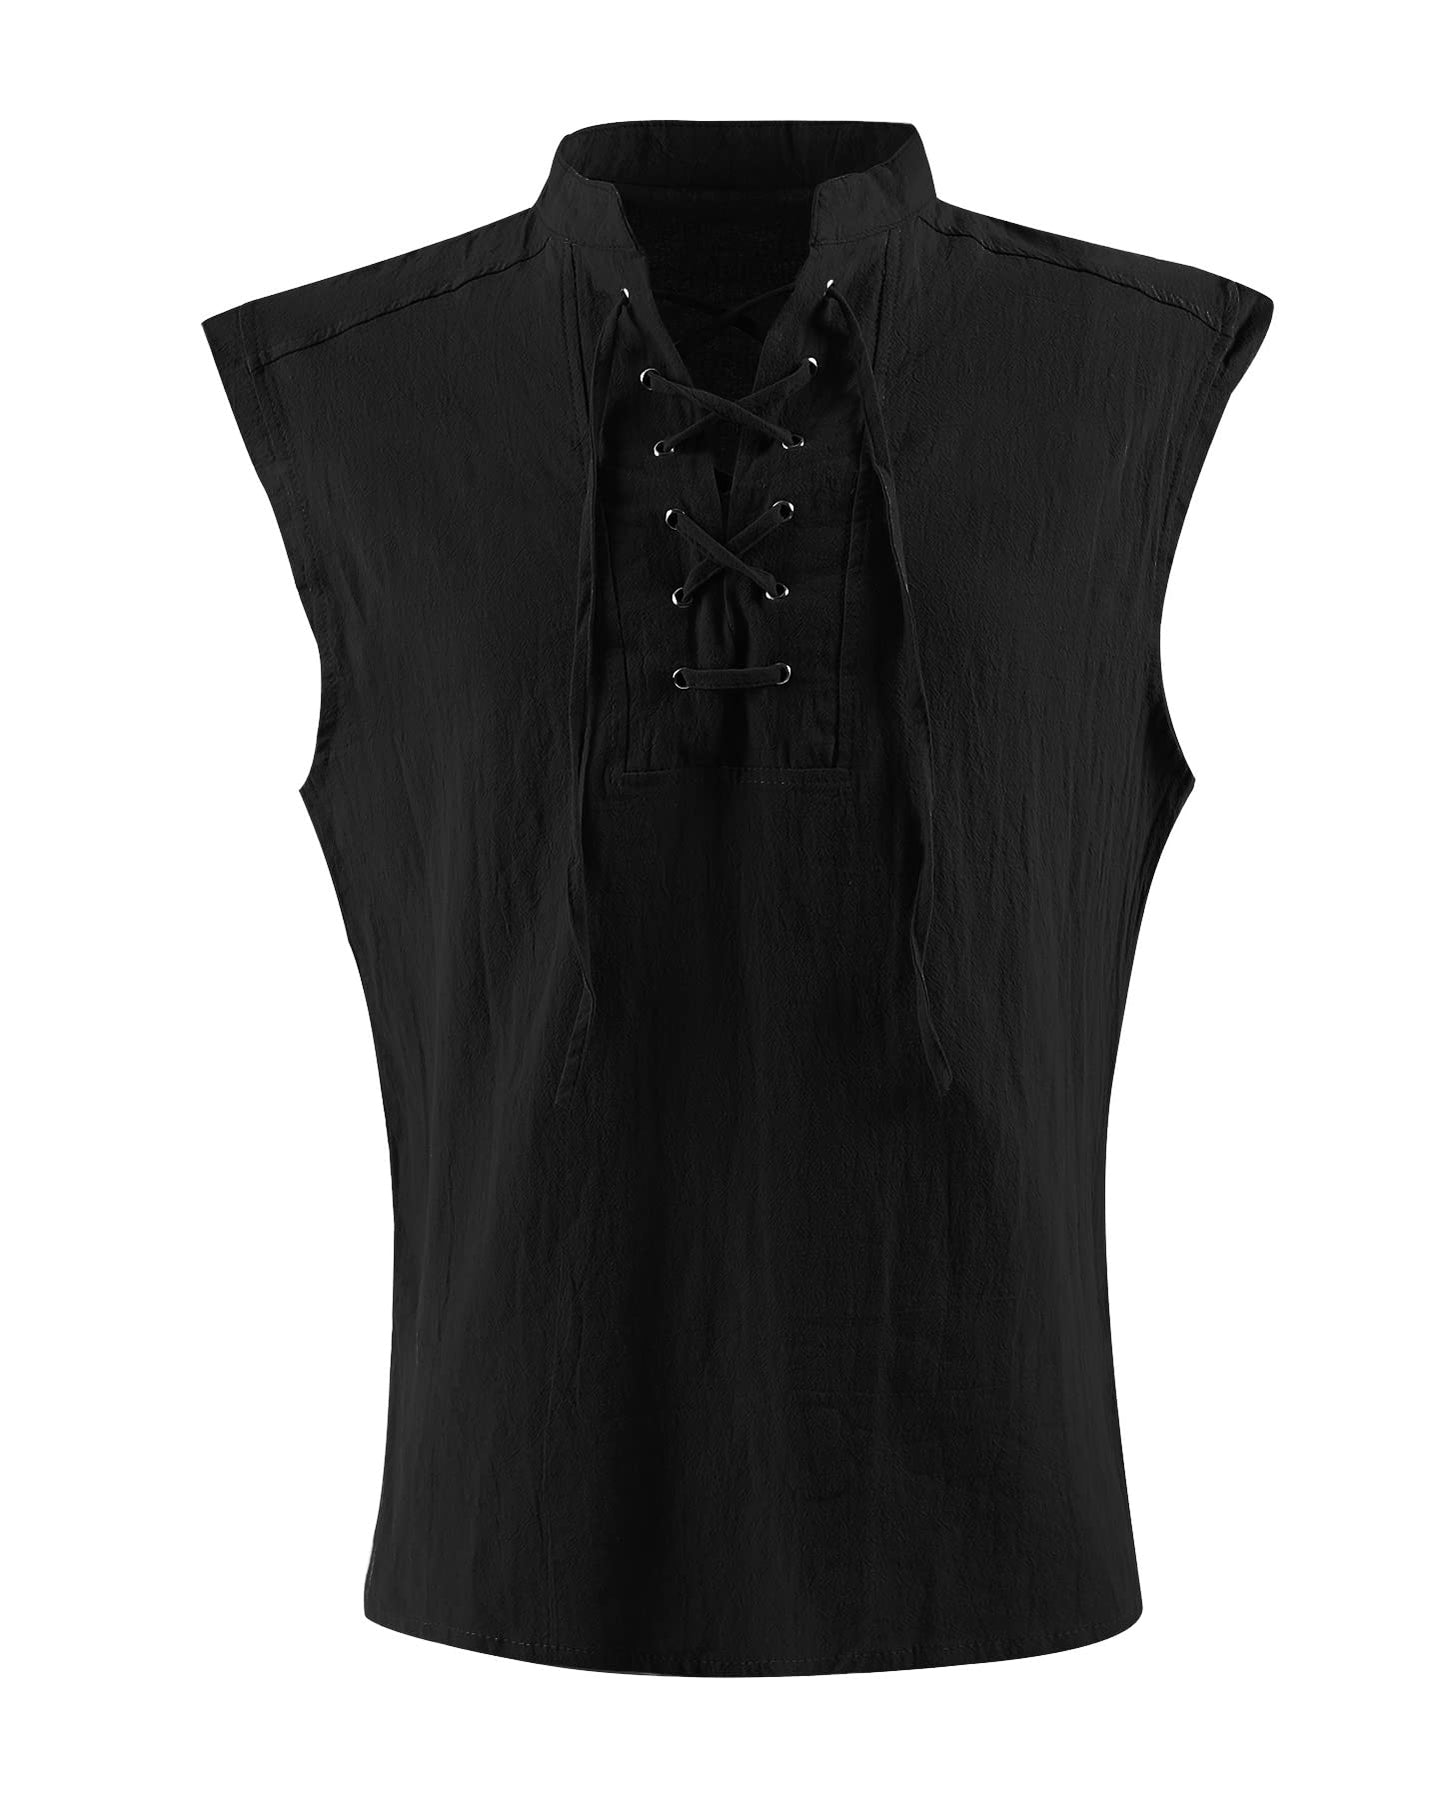 Mens Medieval Renaissance Pirate Costume Sleeveless Lace-up